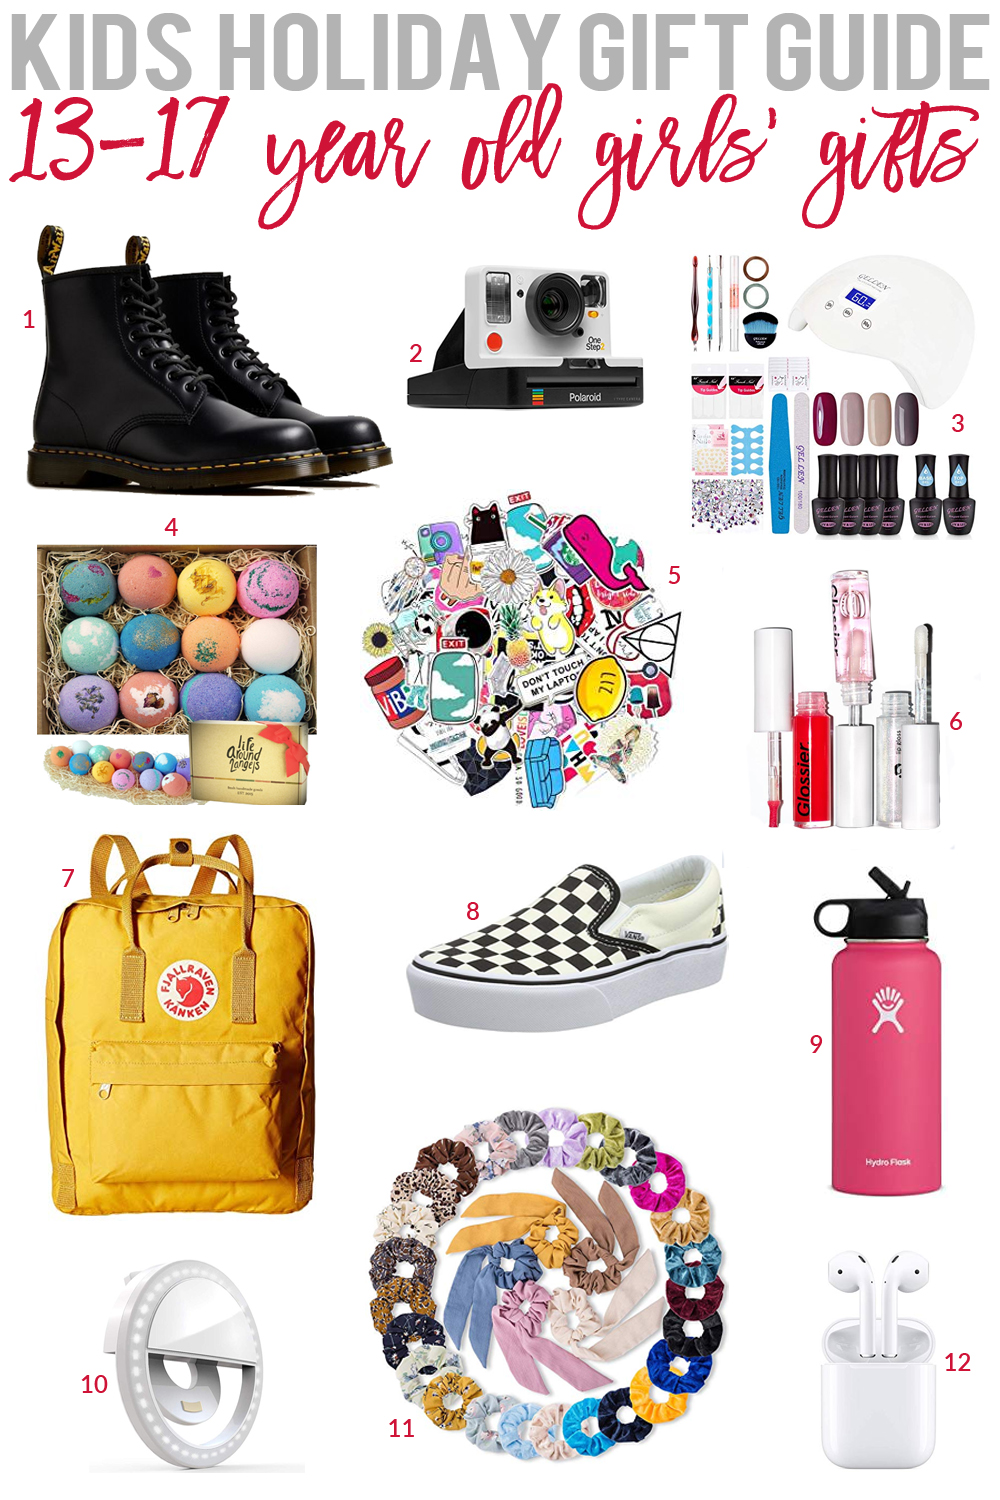 Best Gifts and Toys for 17 Year Old Girls - Favorite Top Gifts